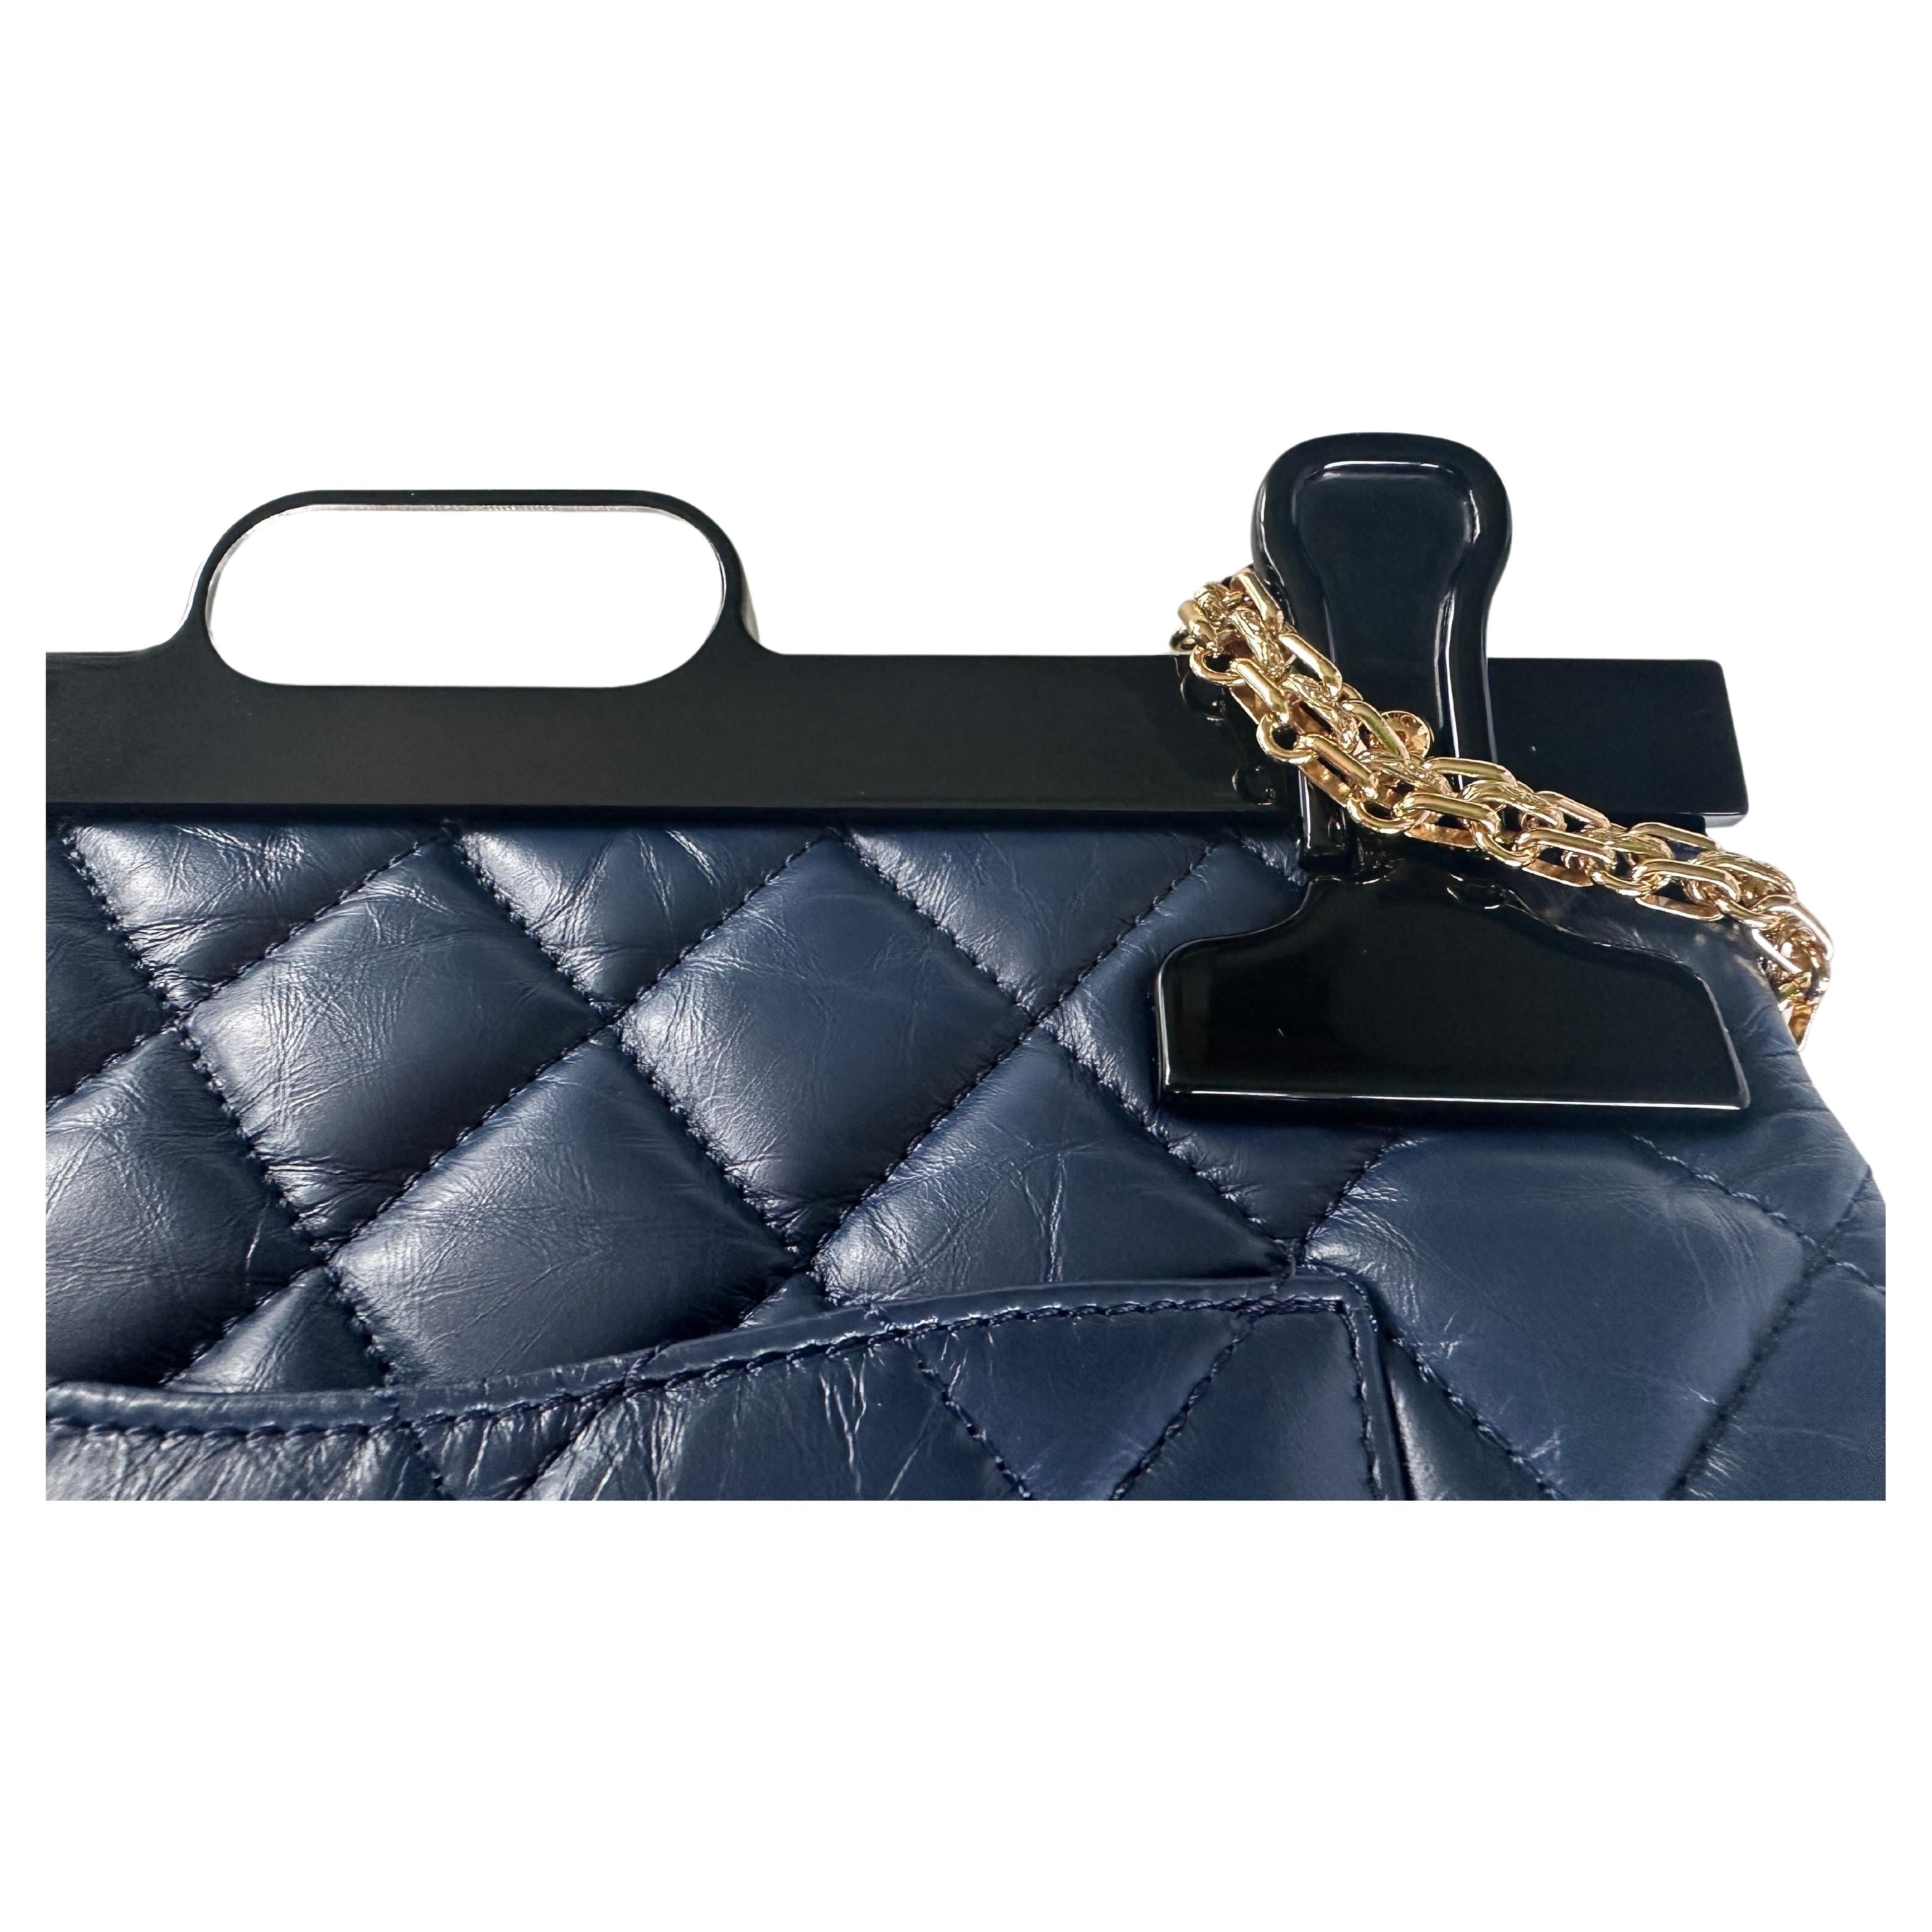 Chanel 2016 Limited Editiion 2.55 Reissue Rare Hanger Navy Blue Classic Flap Bag For Sale 1